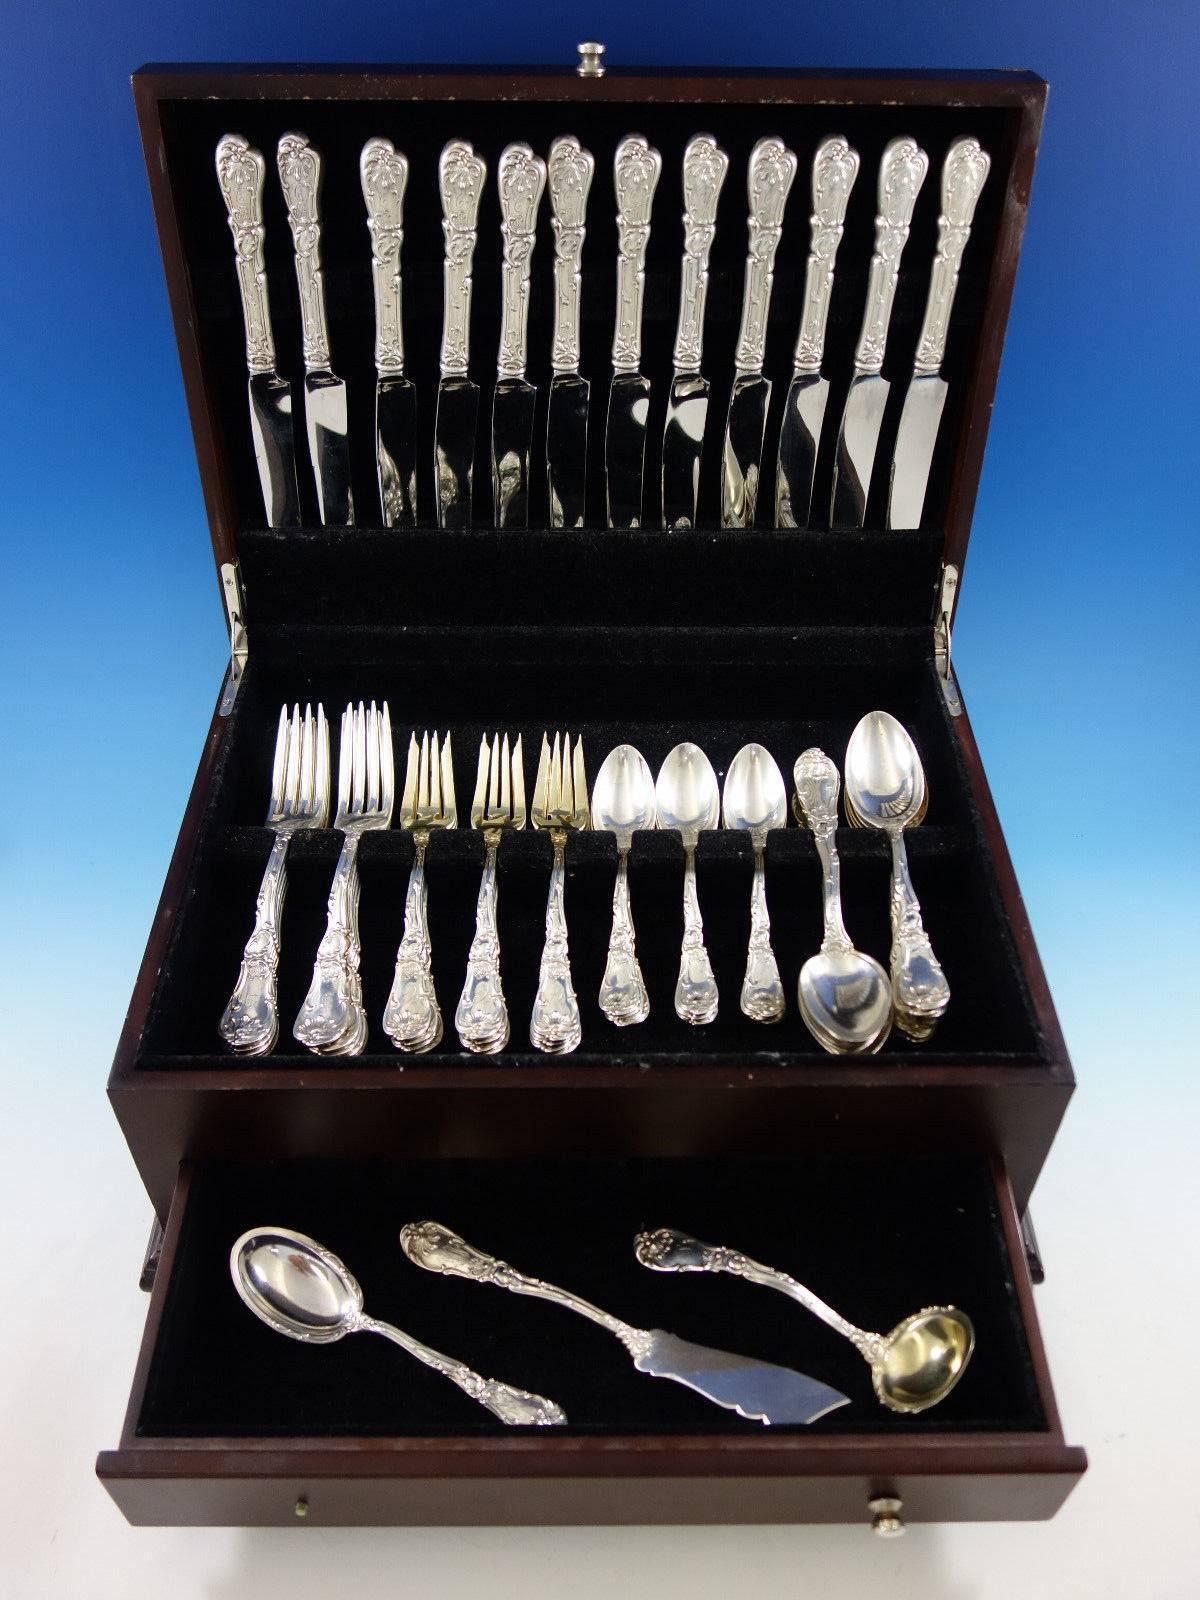 Dinner size Hanover by Gorham sterling silver flatware set, 56 pieces. This scarce pattern with shell motif was introduced by Gorham in the year 1895. This set includes: 12 dinner size knives, 9 3/4", 12 dinner size forks, 7 5/8", 12 salad